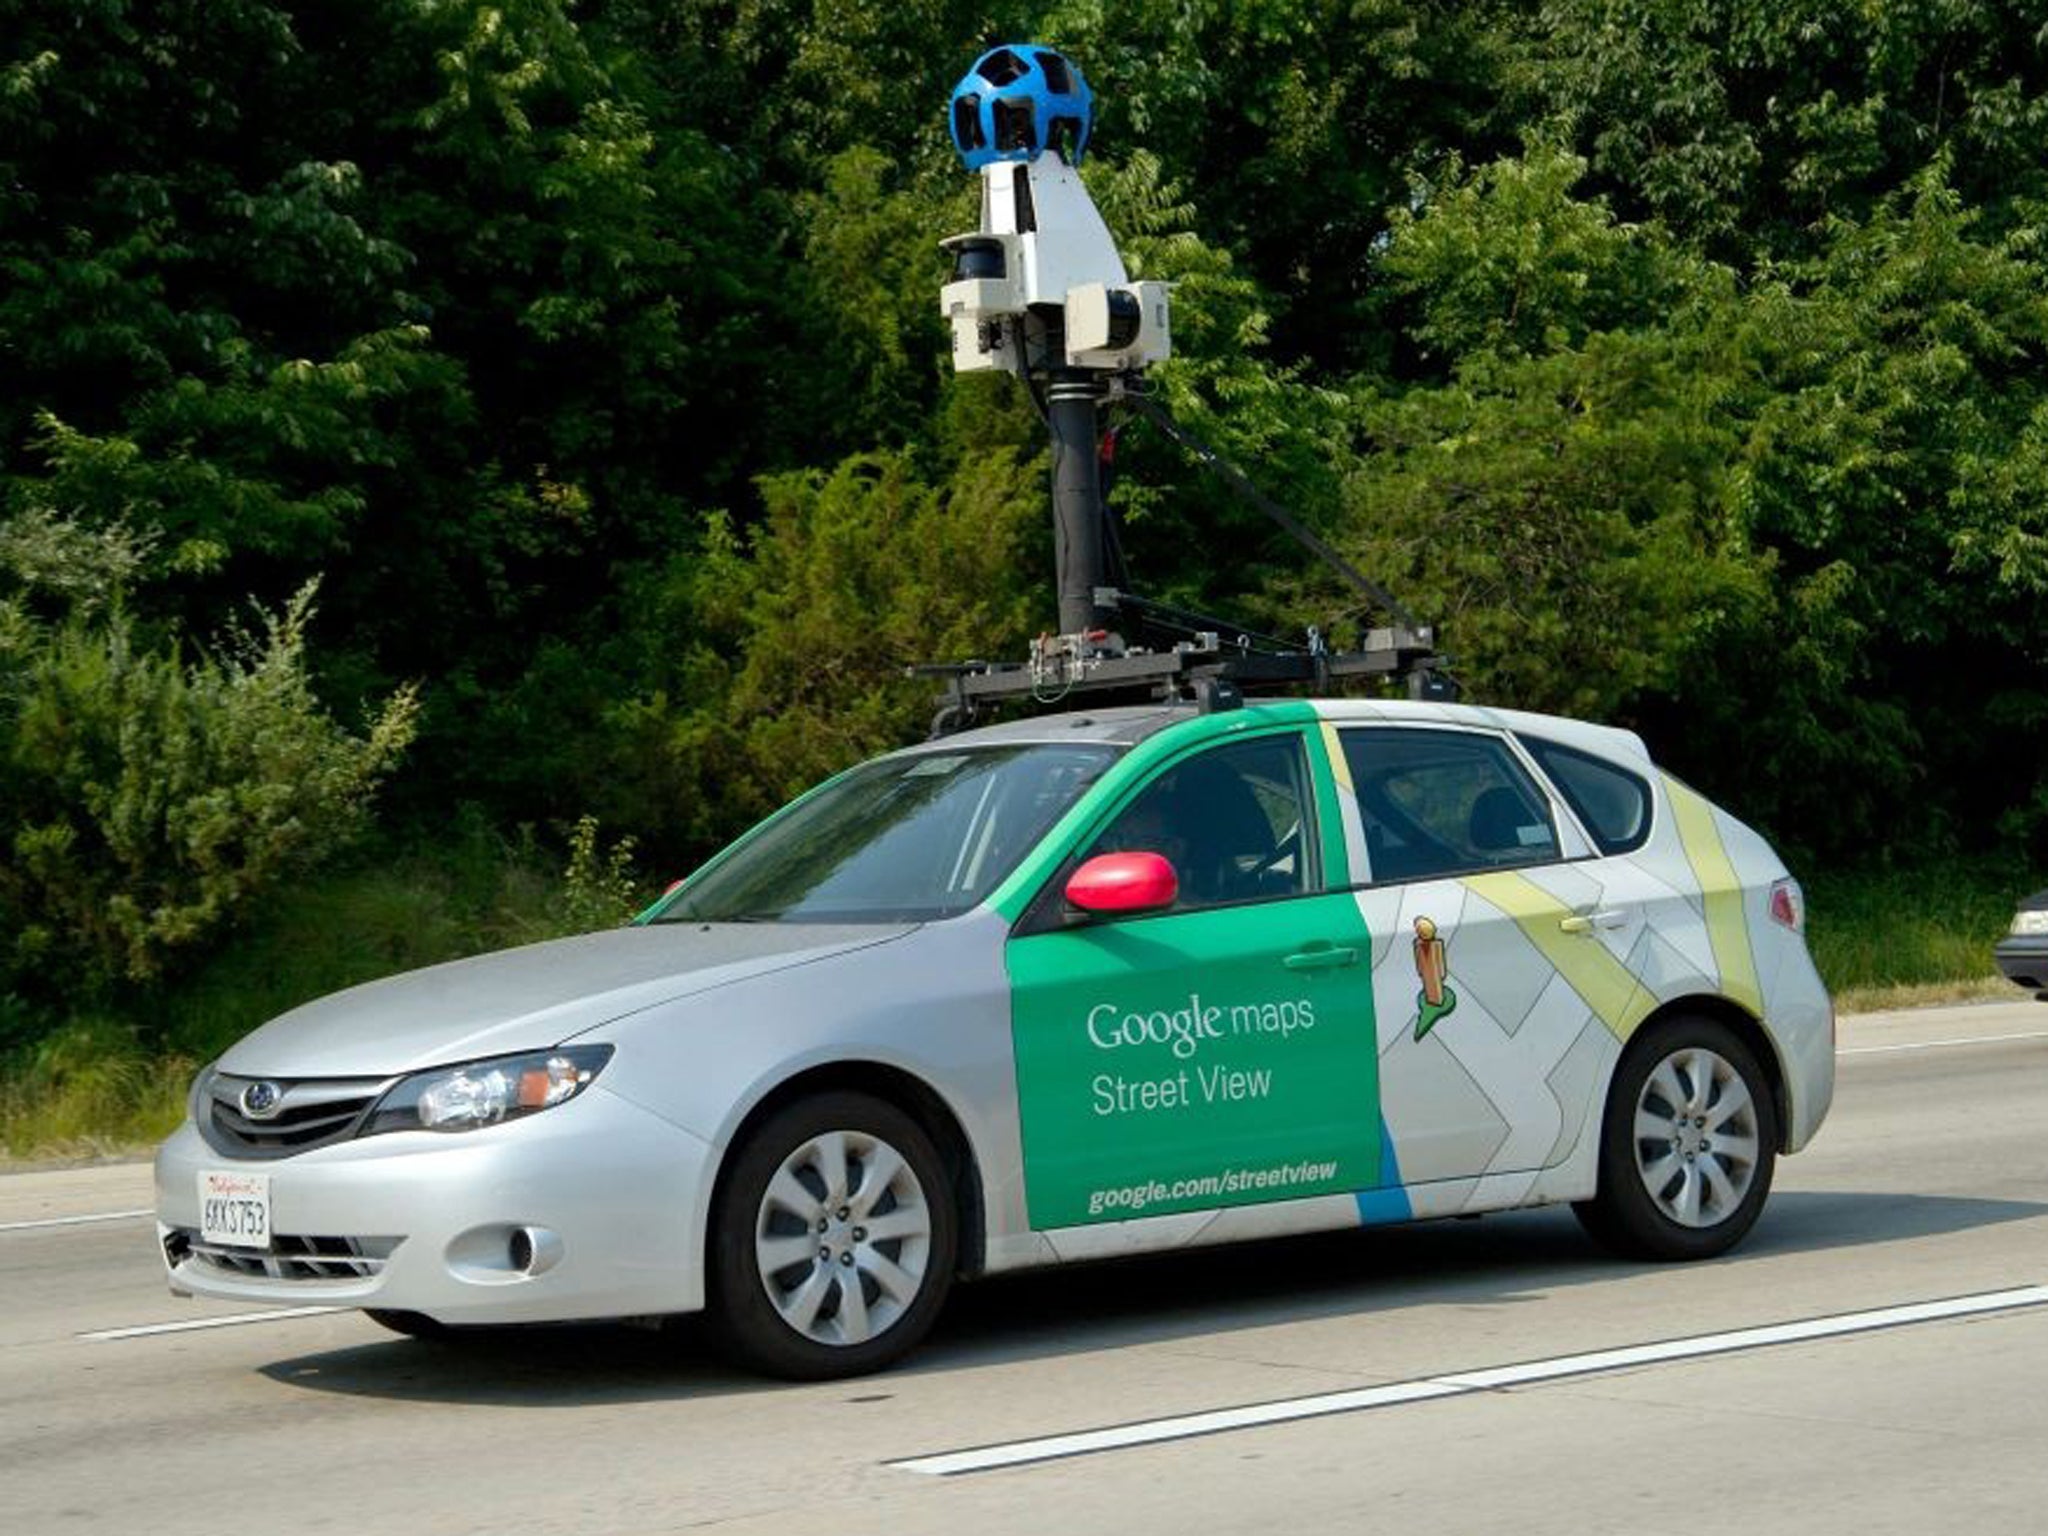 Google was ordered to pay a $7m (£4.6m) fine and agreed to destroy emails, passwords and browsing histories collected as Street View cars surveyed neighbourhoods in the US between 2008 and 2010